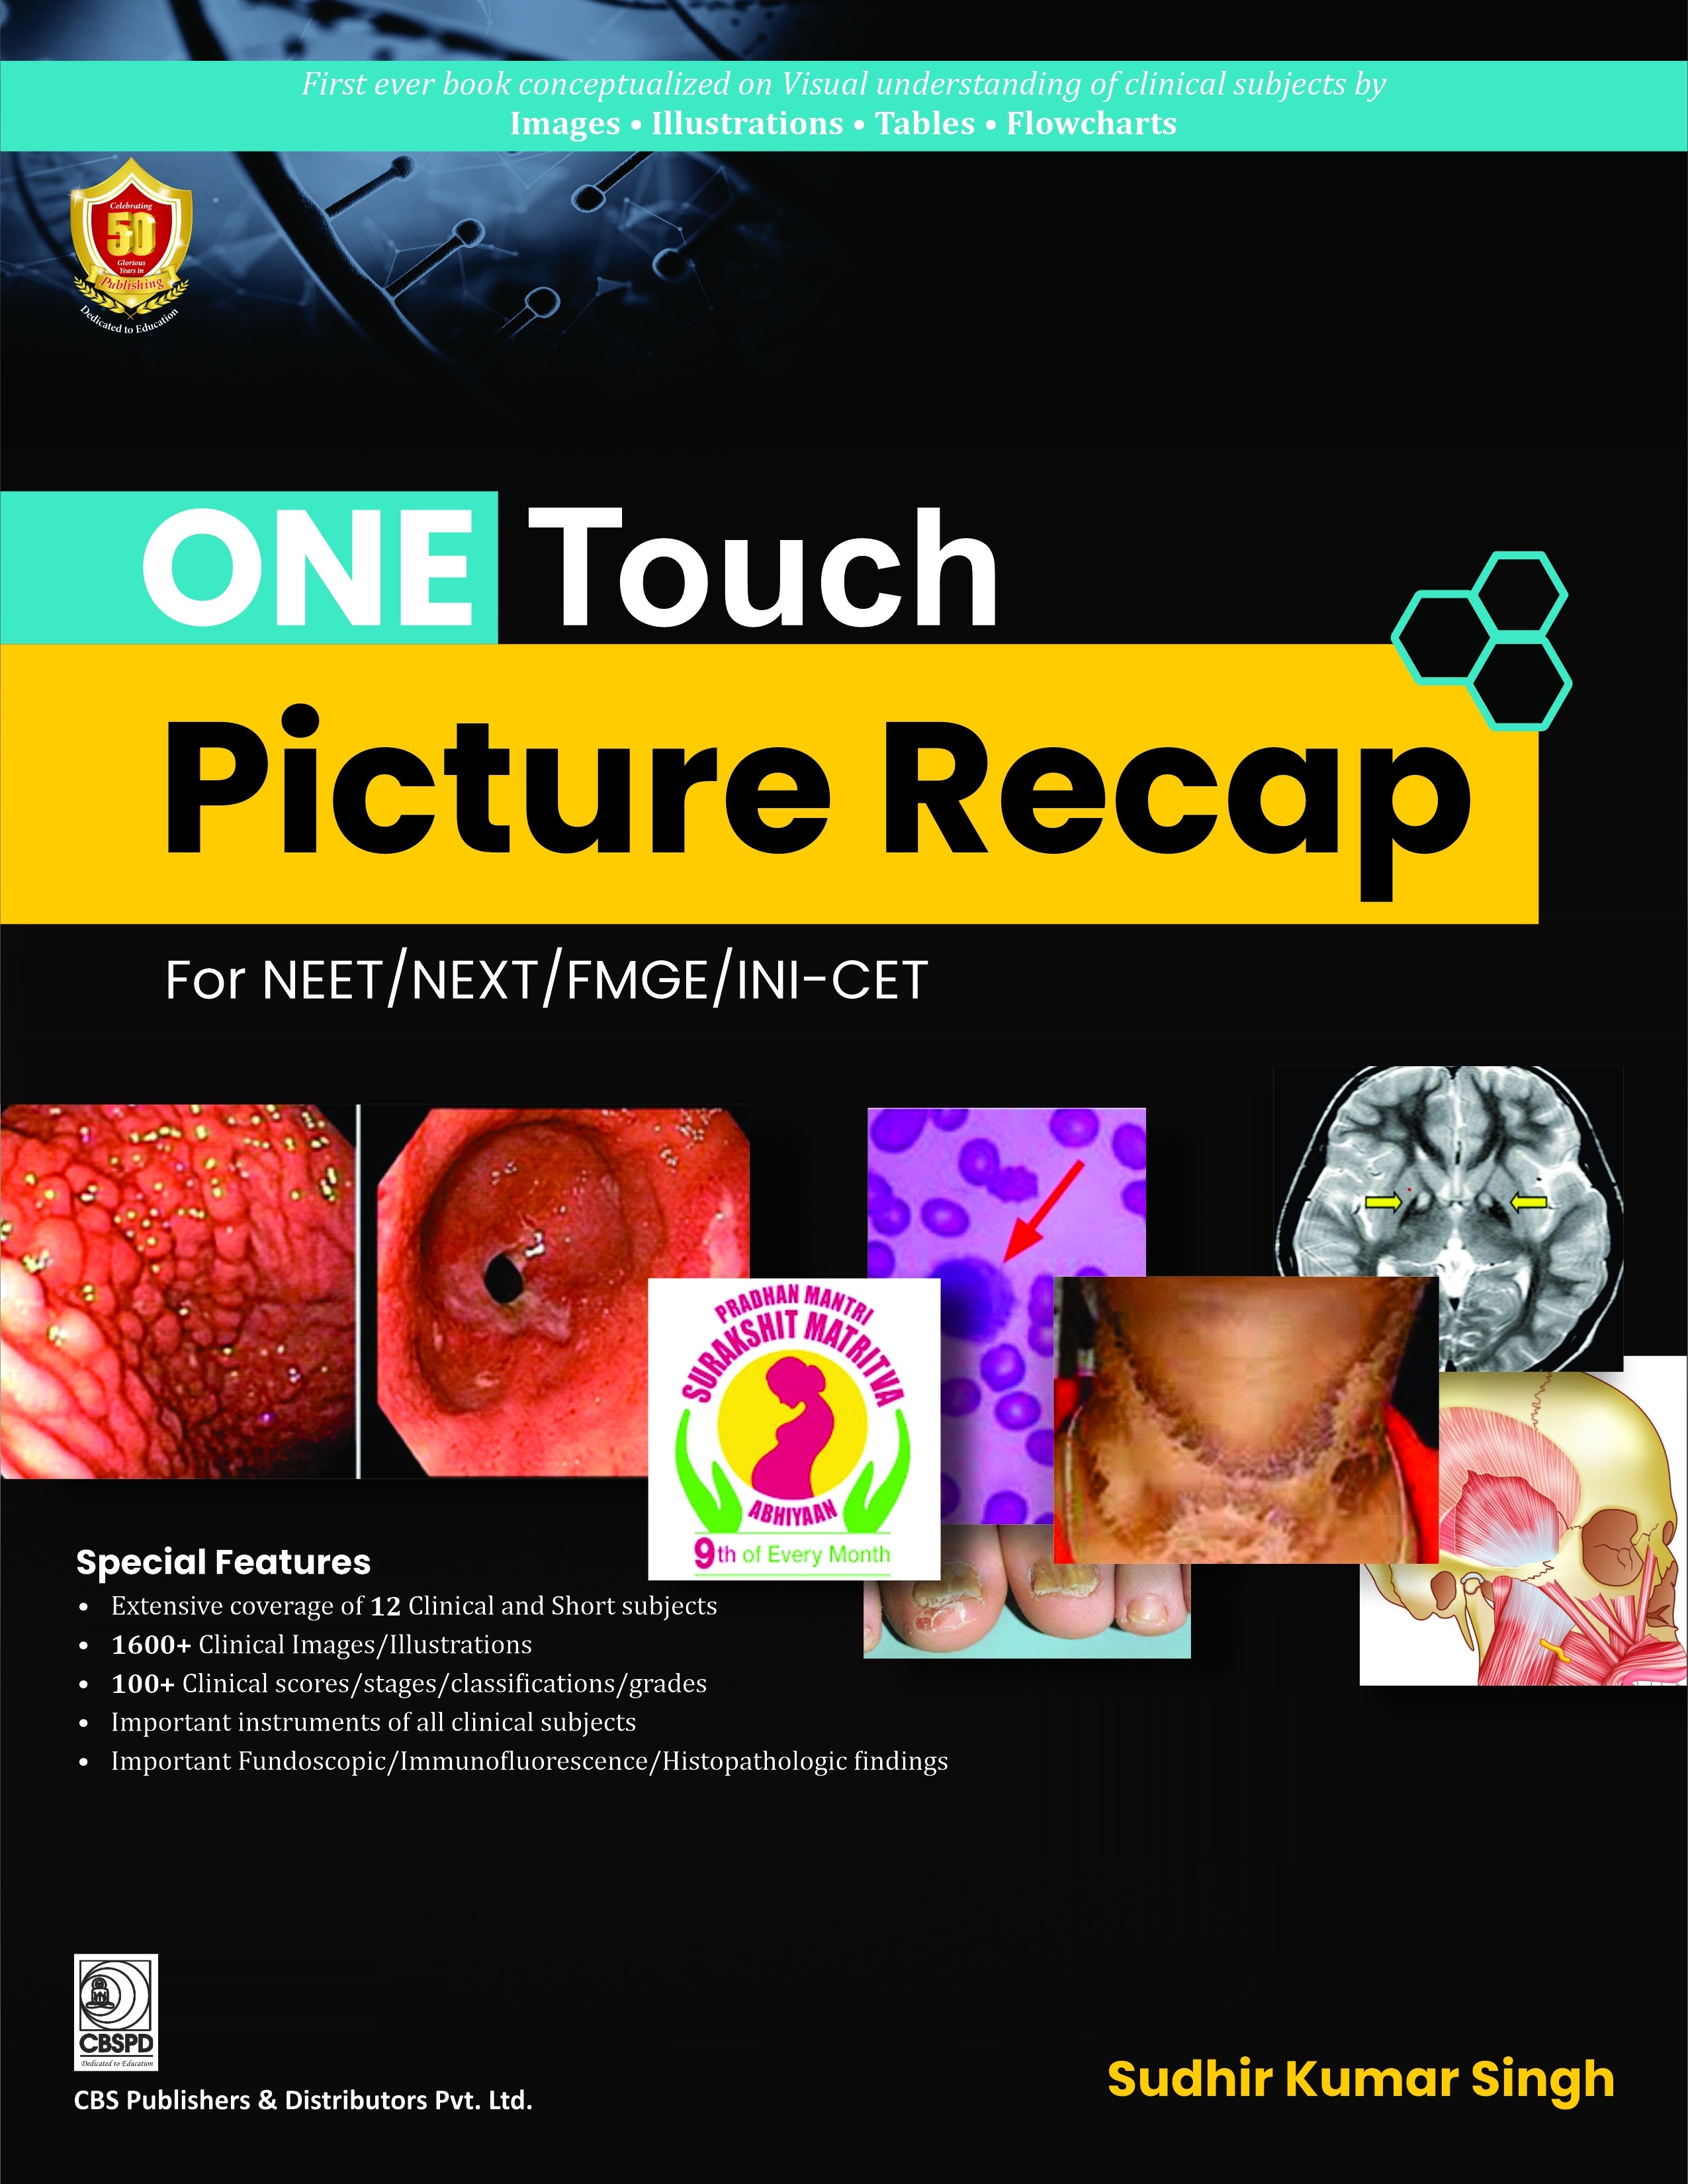 ONE TOUCH PICTURE RECAP for NEET/NEXT/FMGE/INI-CET